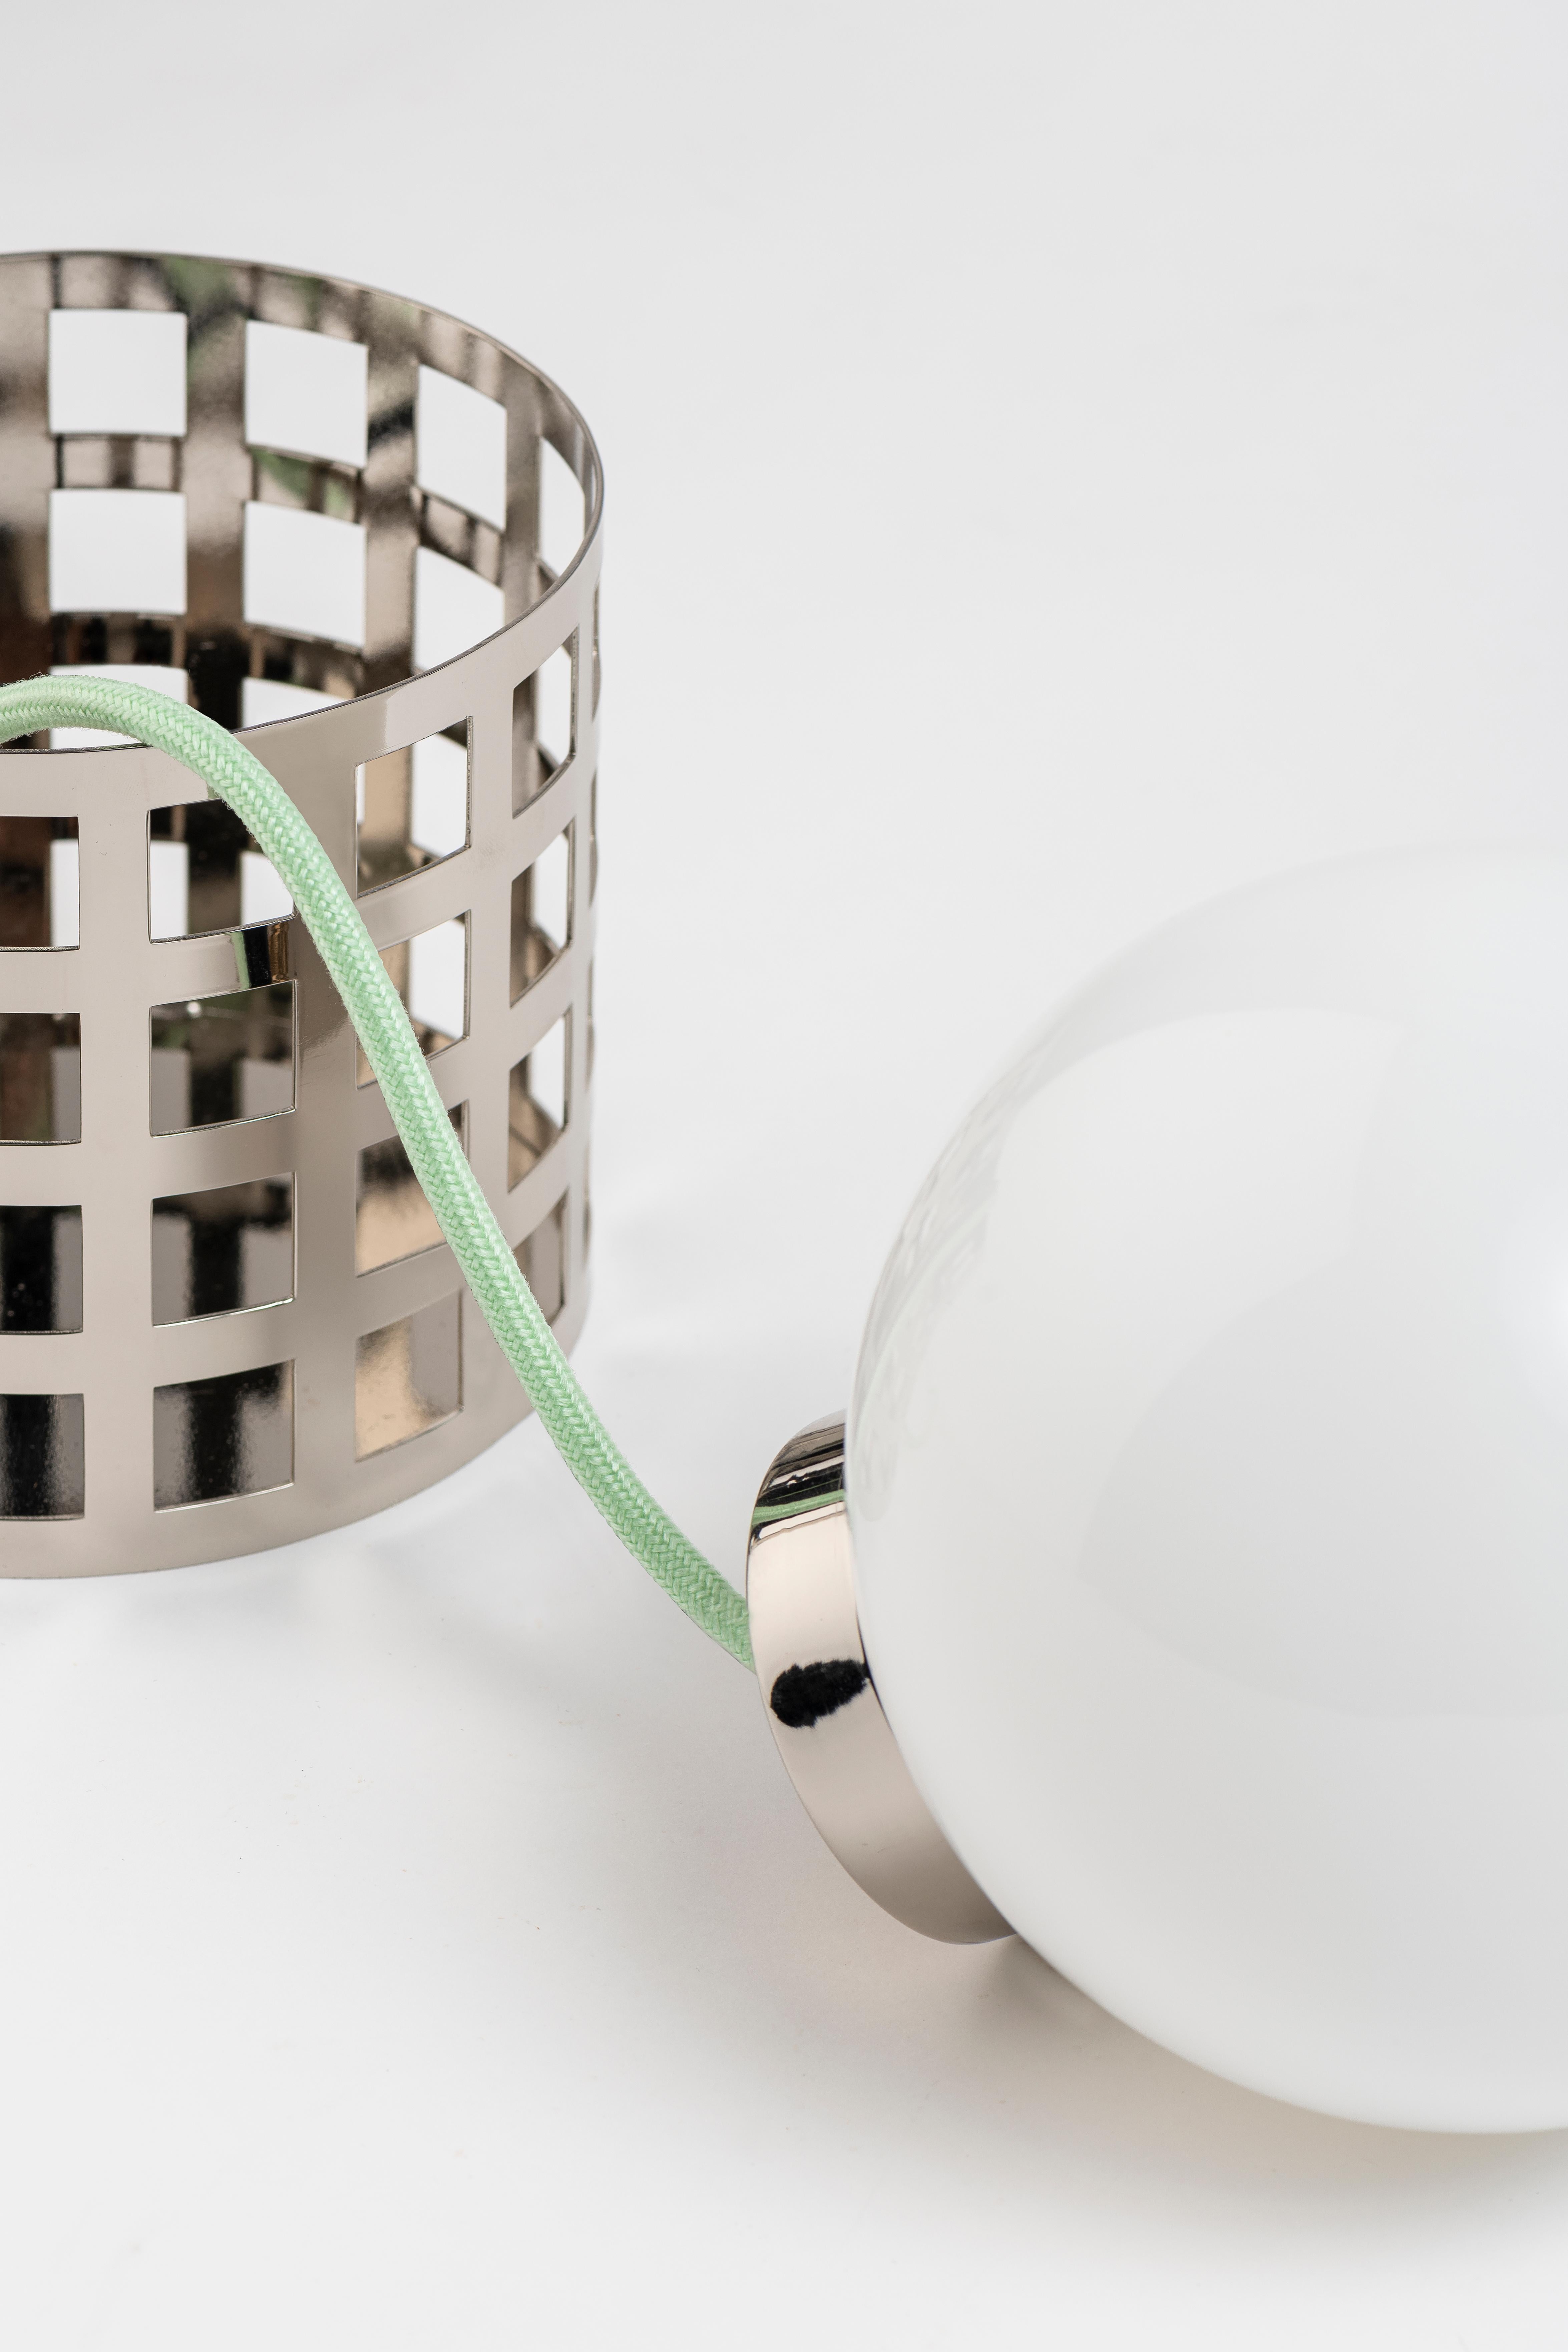 The archetype of modern lighting. Innovative, adaptable and performative. With a removable opal glass globe light and a practical on/off switch, its curves make it a true work of art that will effortlessly enhance any interior decor style. Don’t